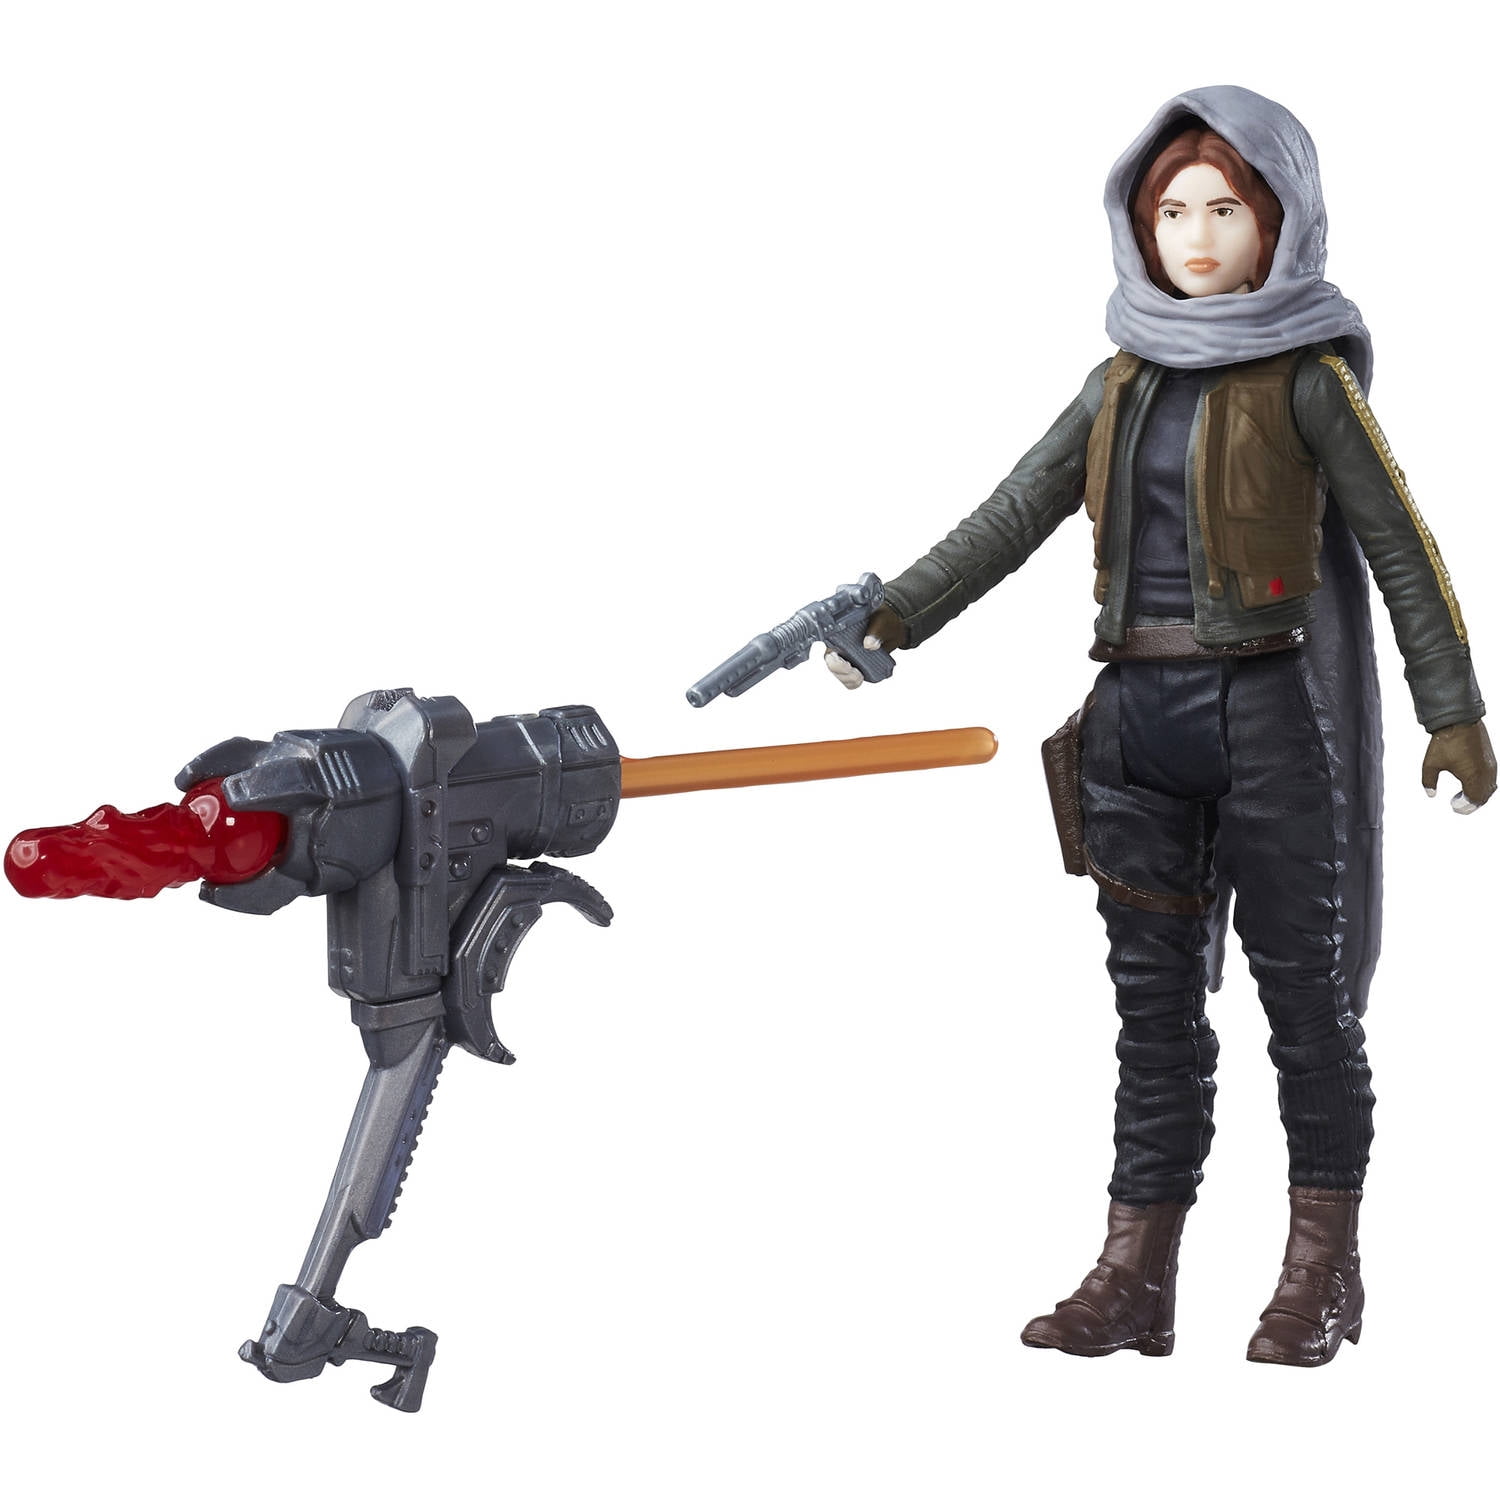 Hasbro Star Wars The Black Series Rogue One SERGEANT JYN ERSO Action Figure for sale online